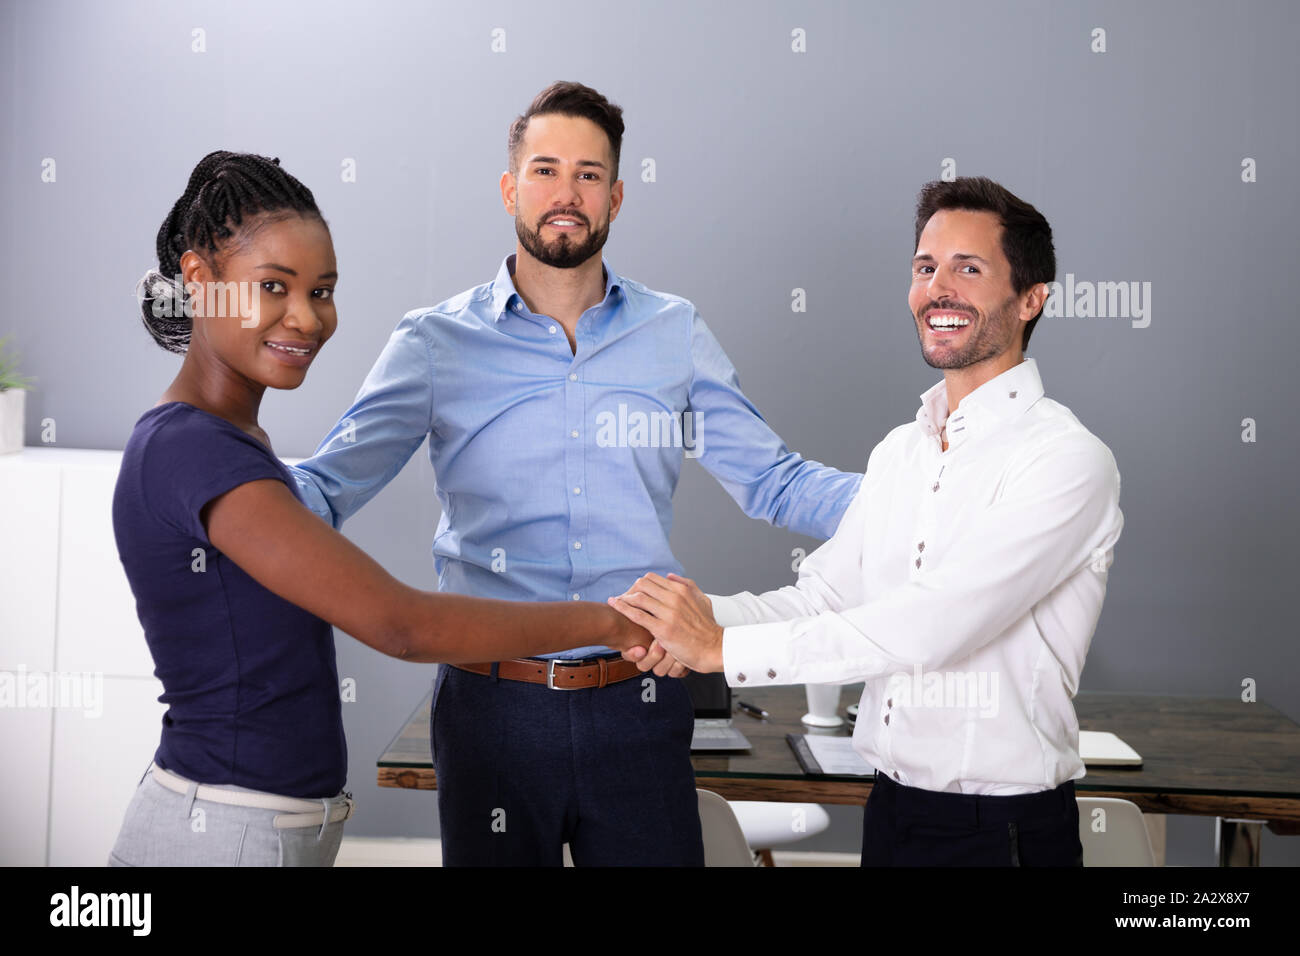 Man Looking At Happy Business People Shaking Hands In Meeting Room Stock Photo